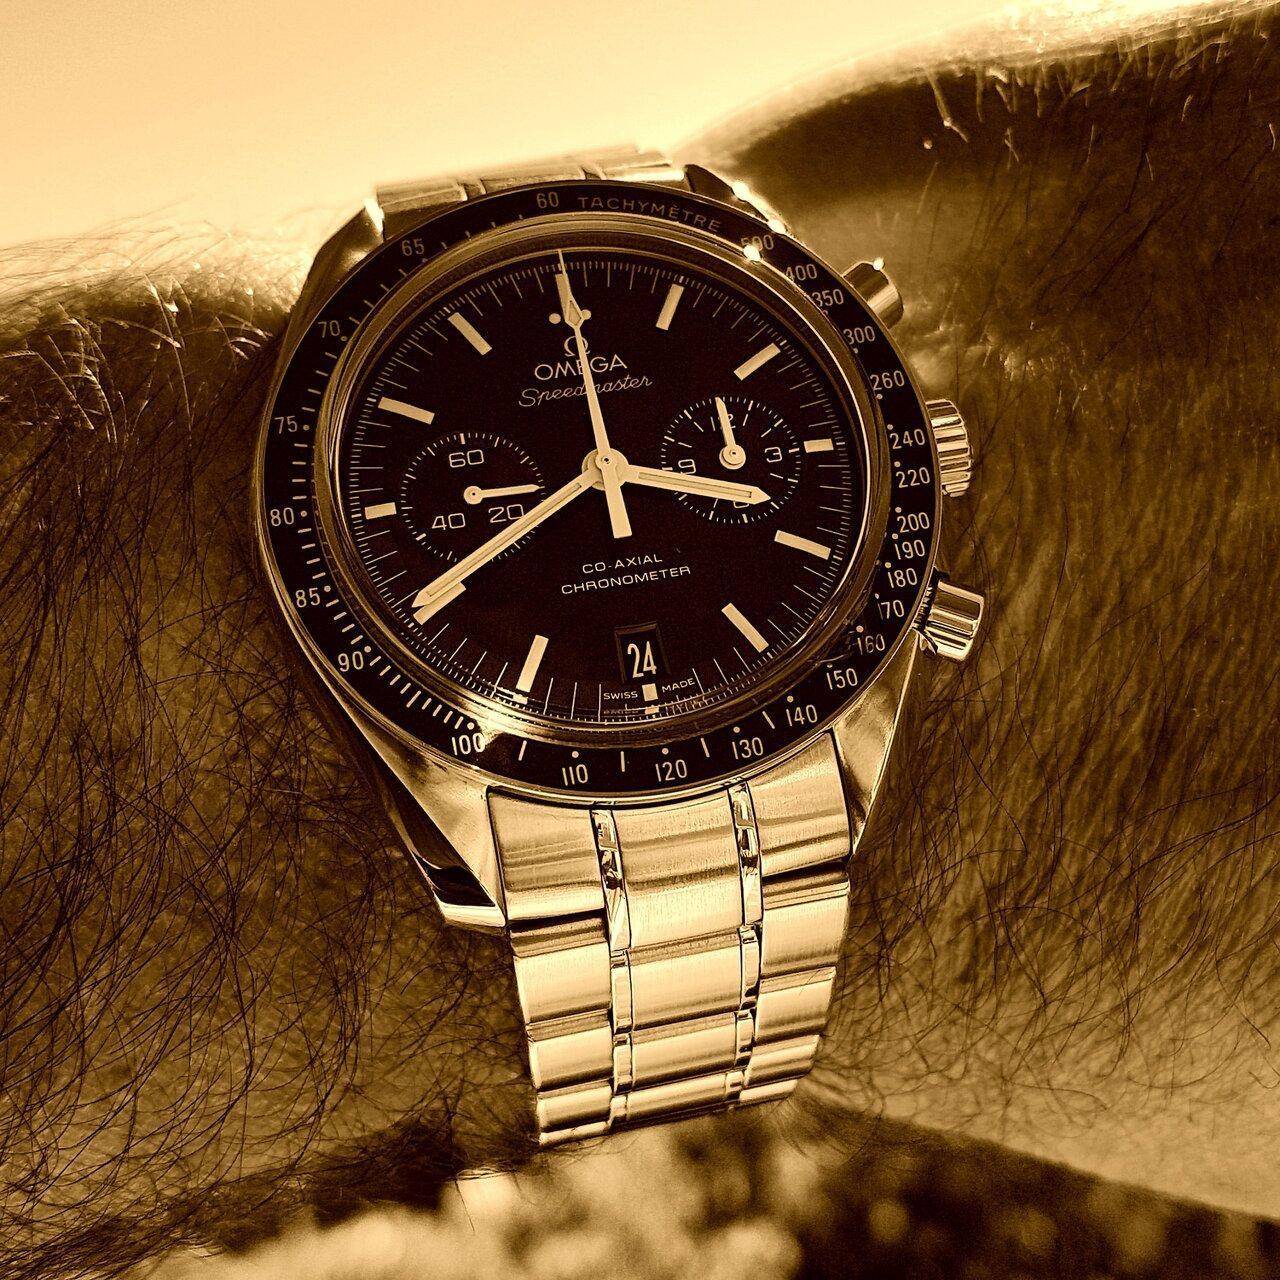 Omega-Speedmaster-Moonwatch-Co-Axial-Chronograph-44.25-mm-Cal.-9300-1-ConvertImage.jpg